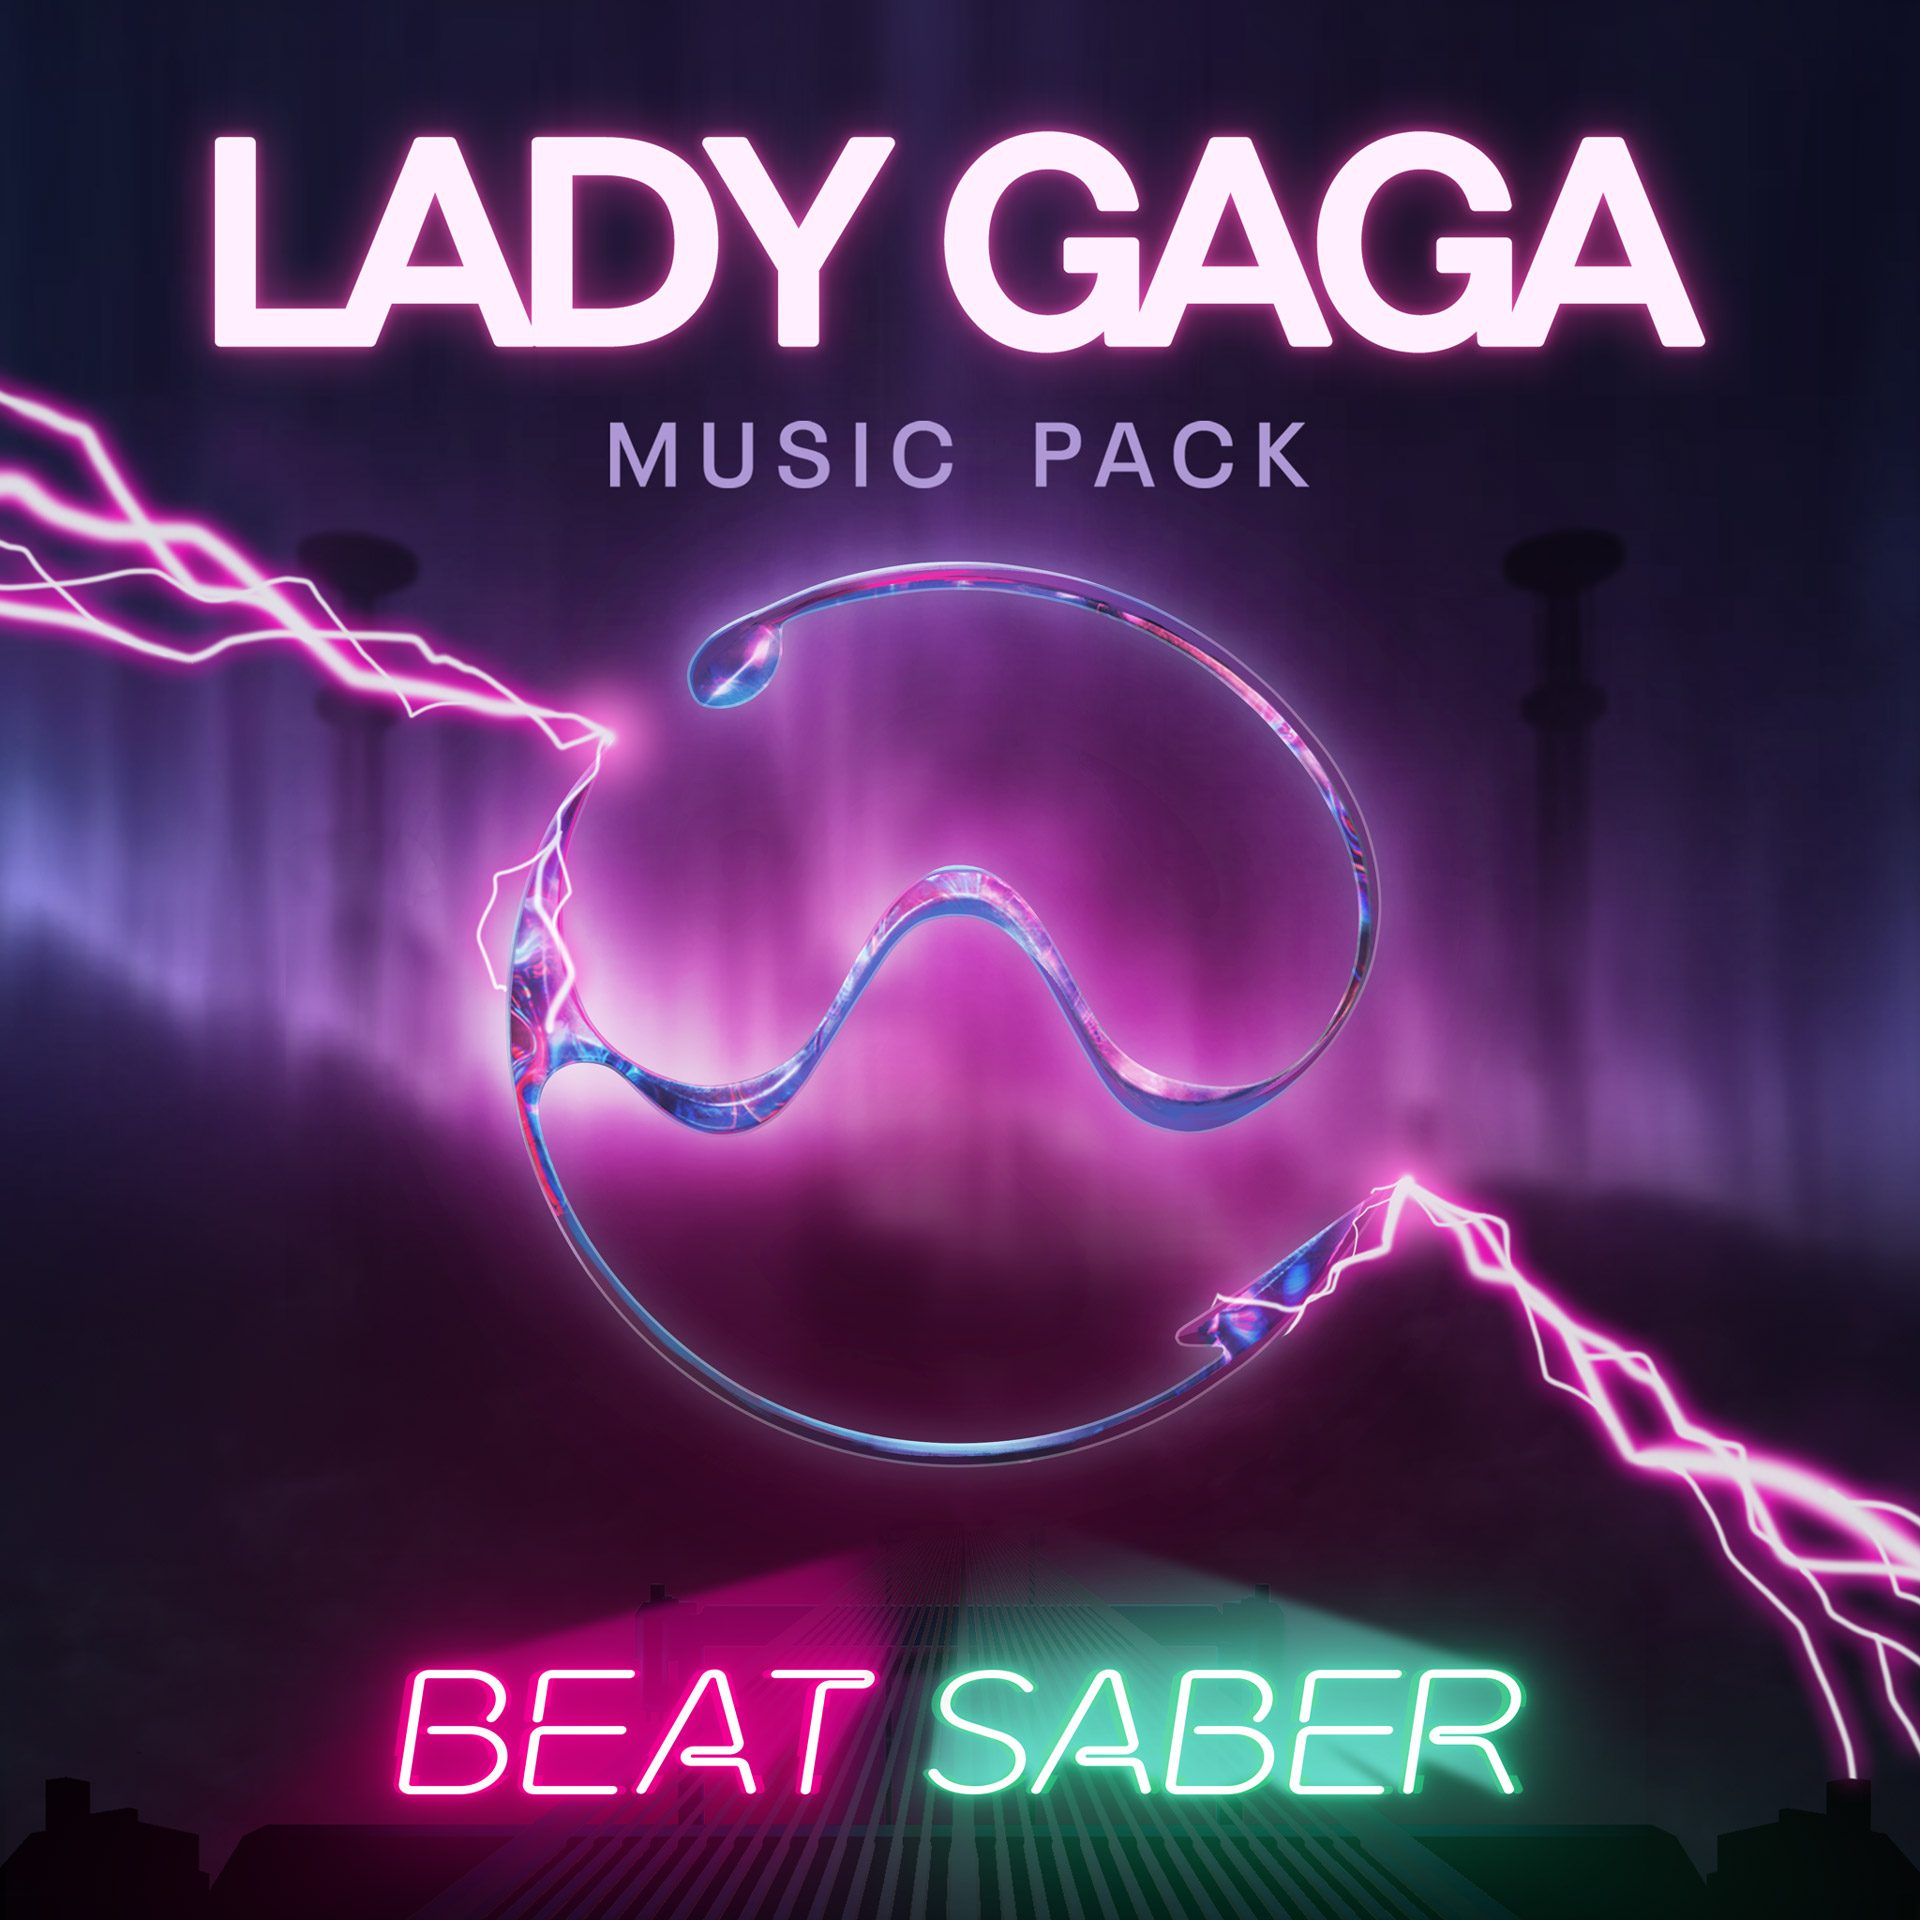 Lady Gaga Music Pack More Songs to Beat